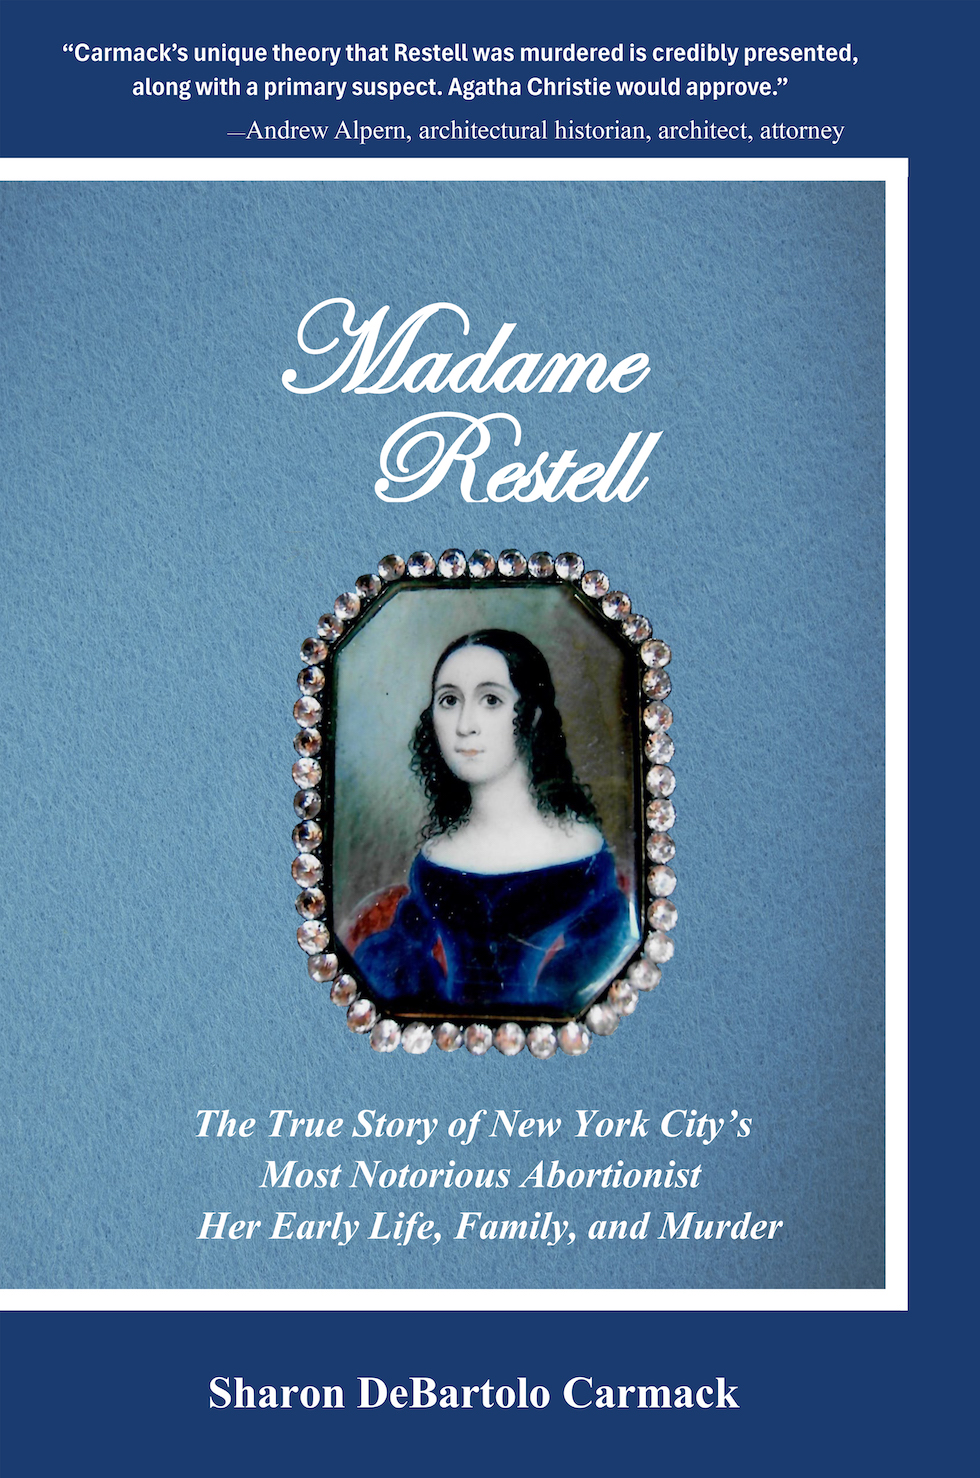 Madame Restell: The True Story of New York City’s Most Notorious Abortionist, Her Early Life, Family, and Murder